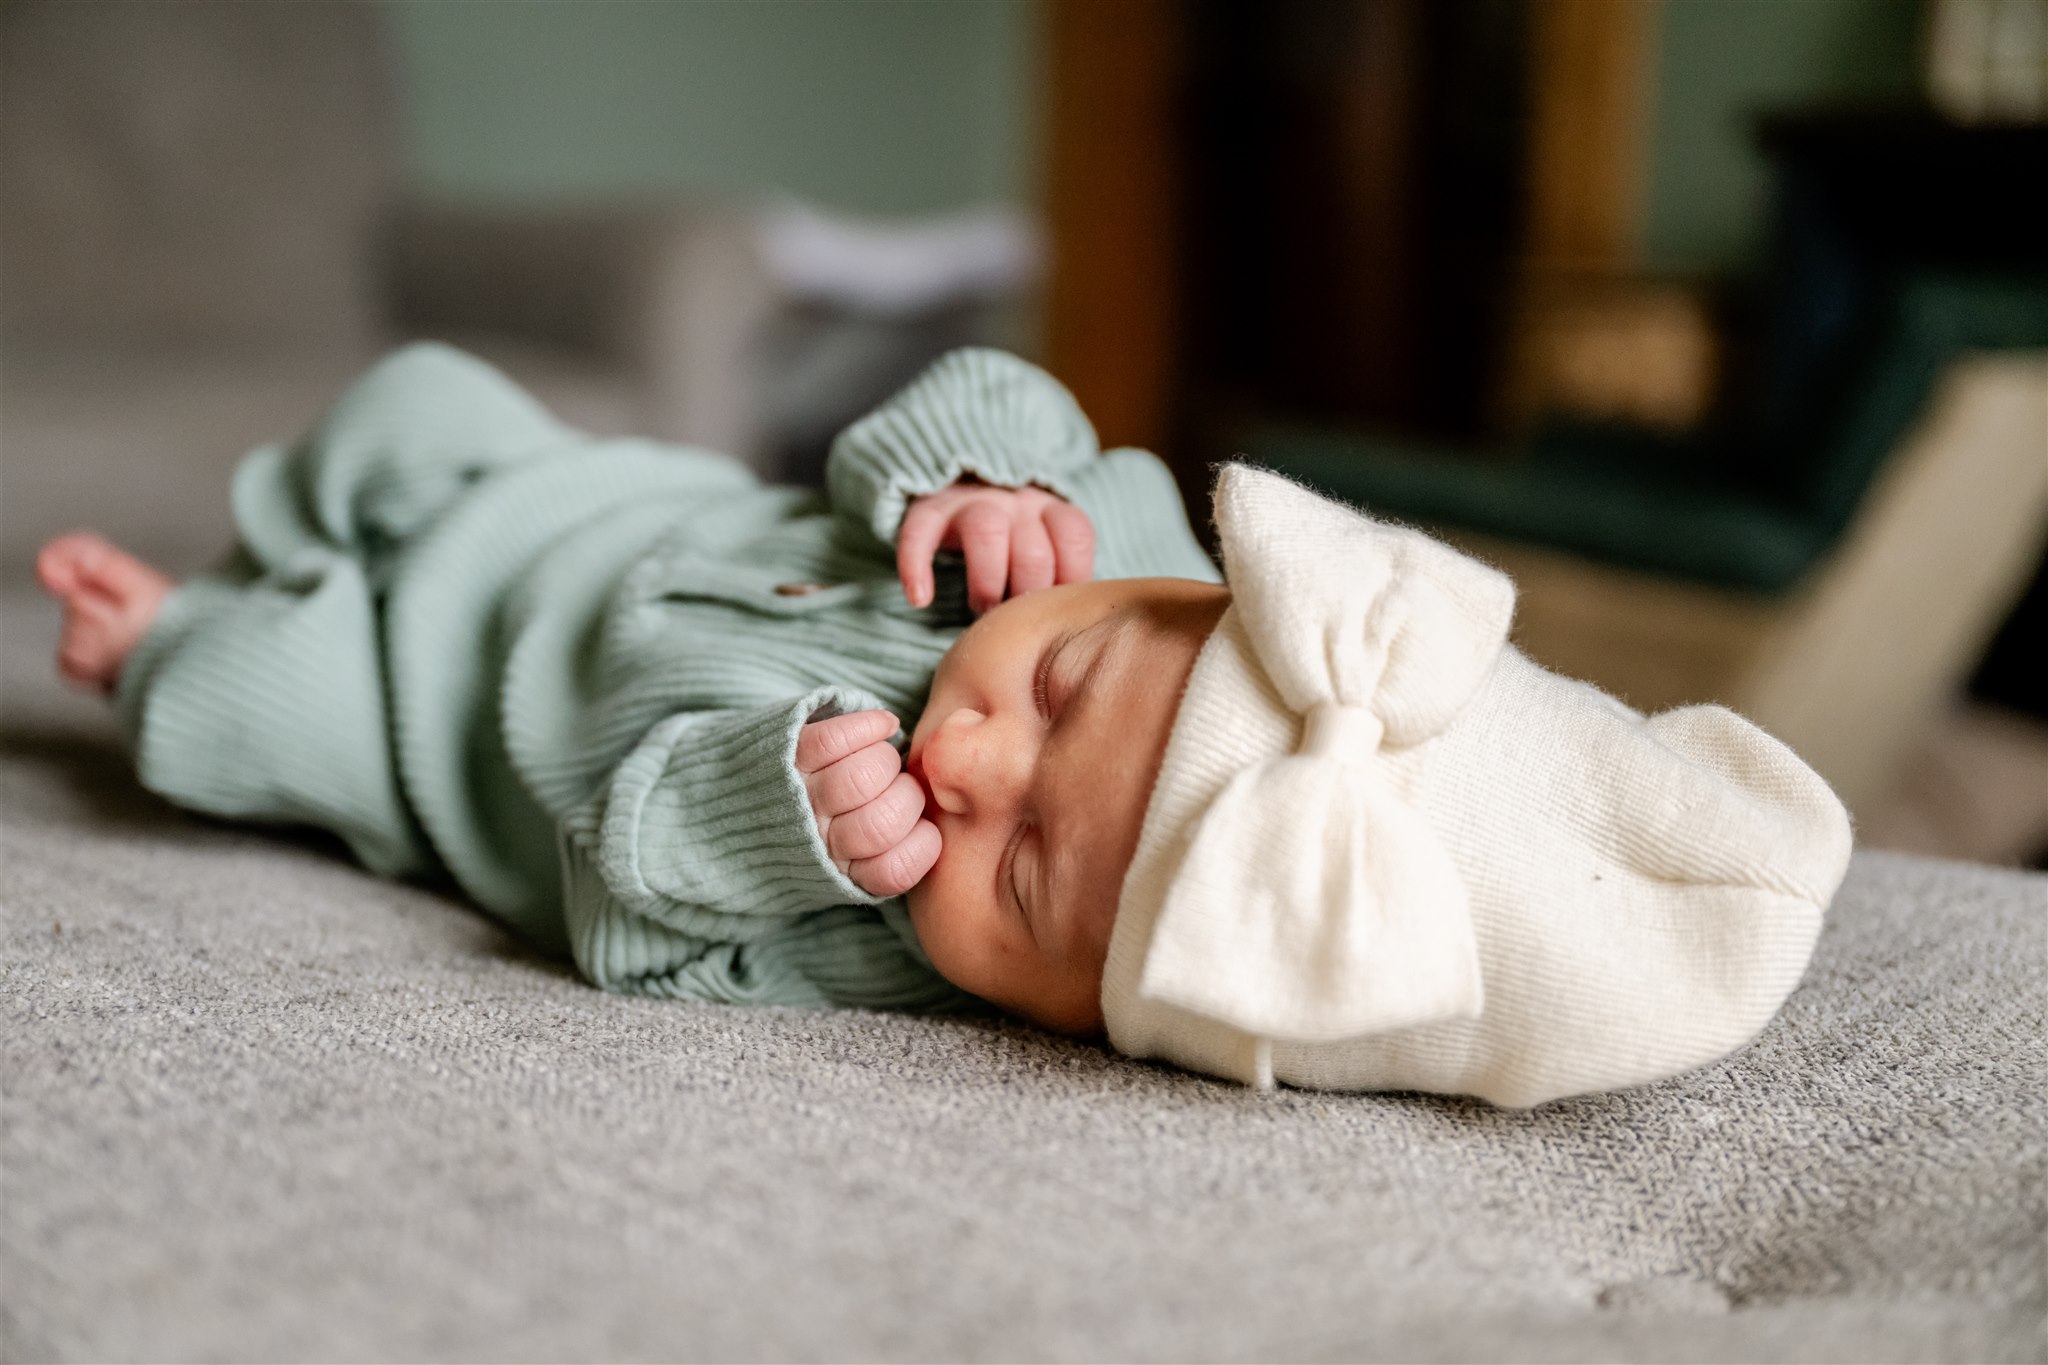 A newborn baby sleeps on a couch in a green onesie and large white beanie from Chicago Baby Stores